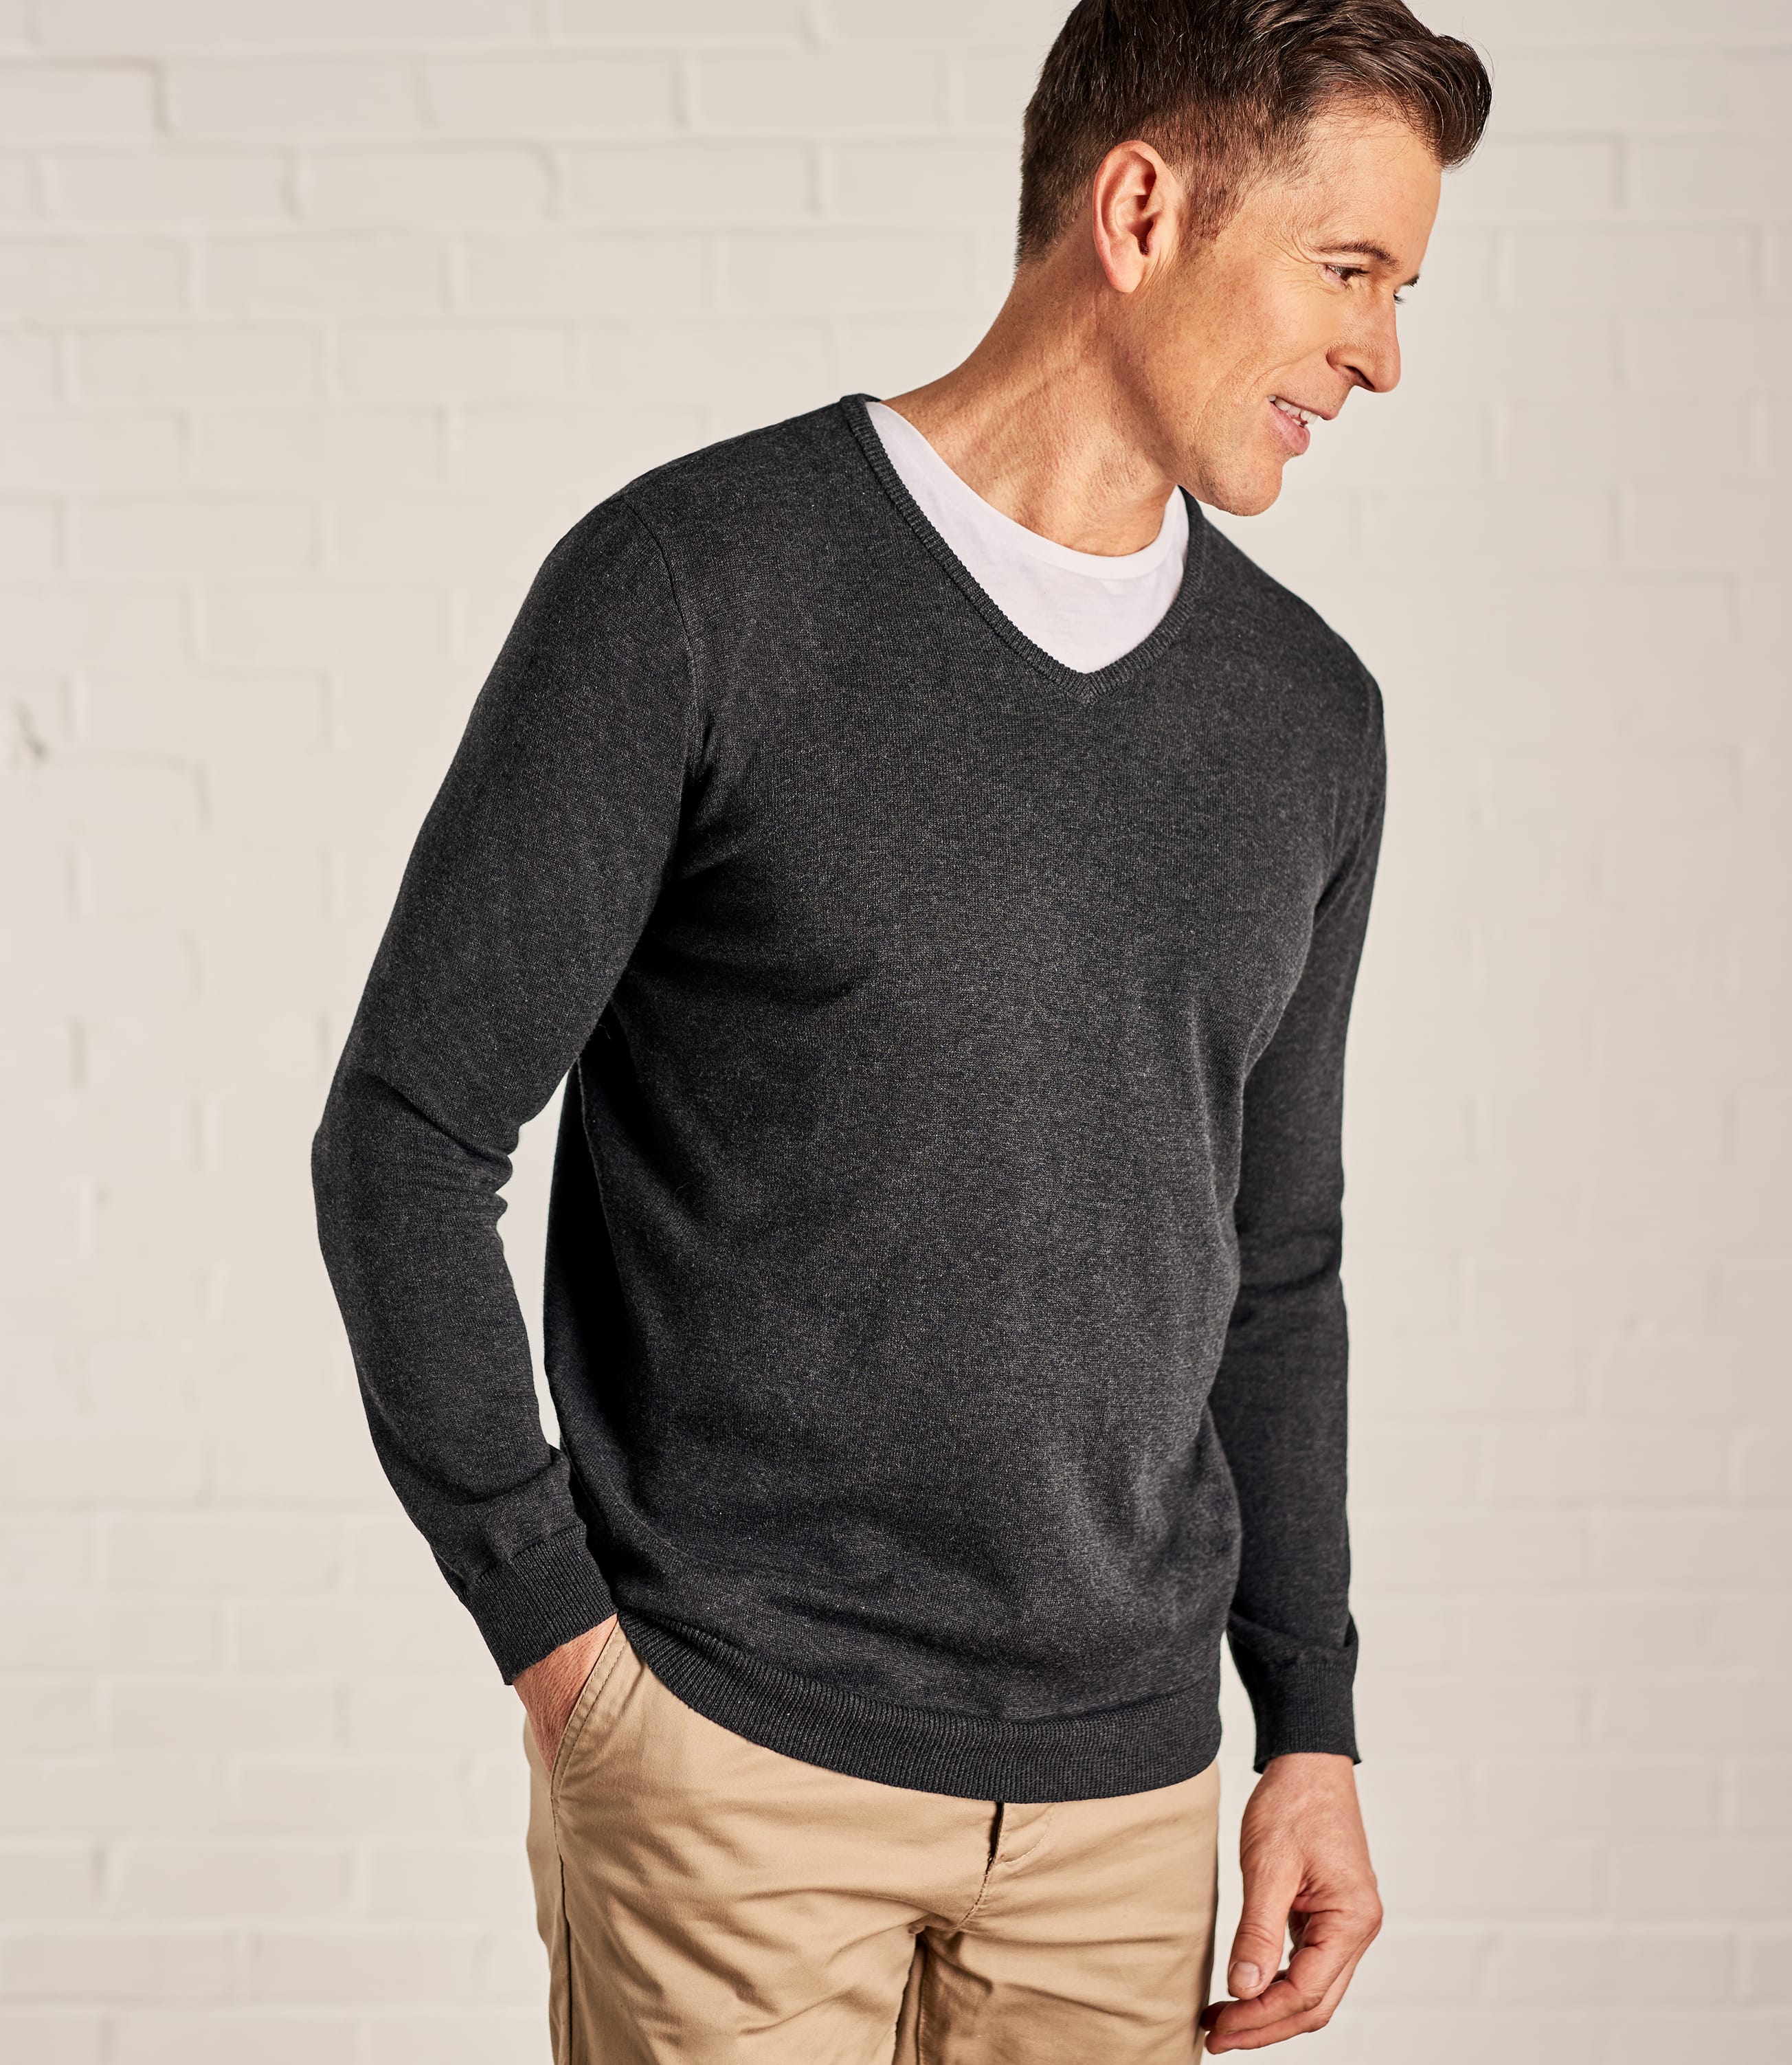 mens grey sweater outfit